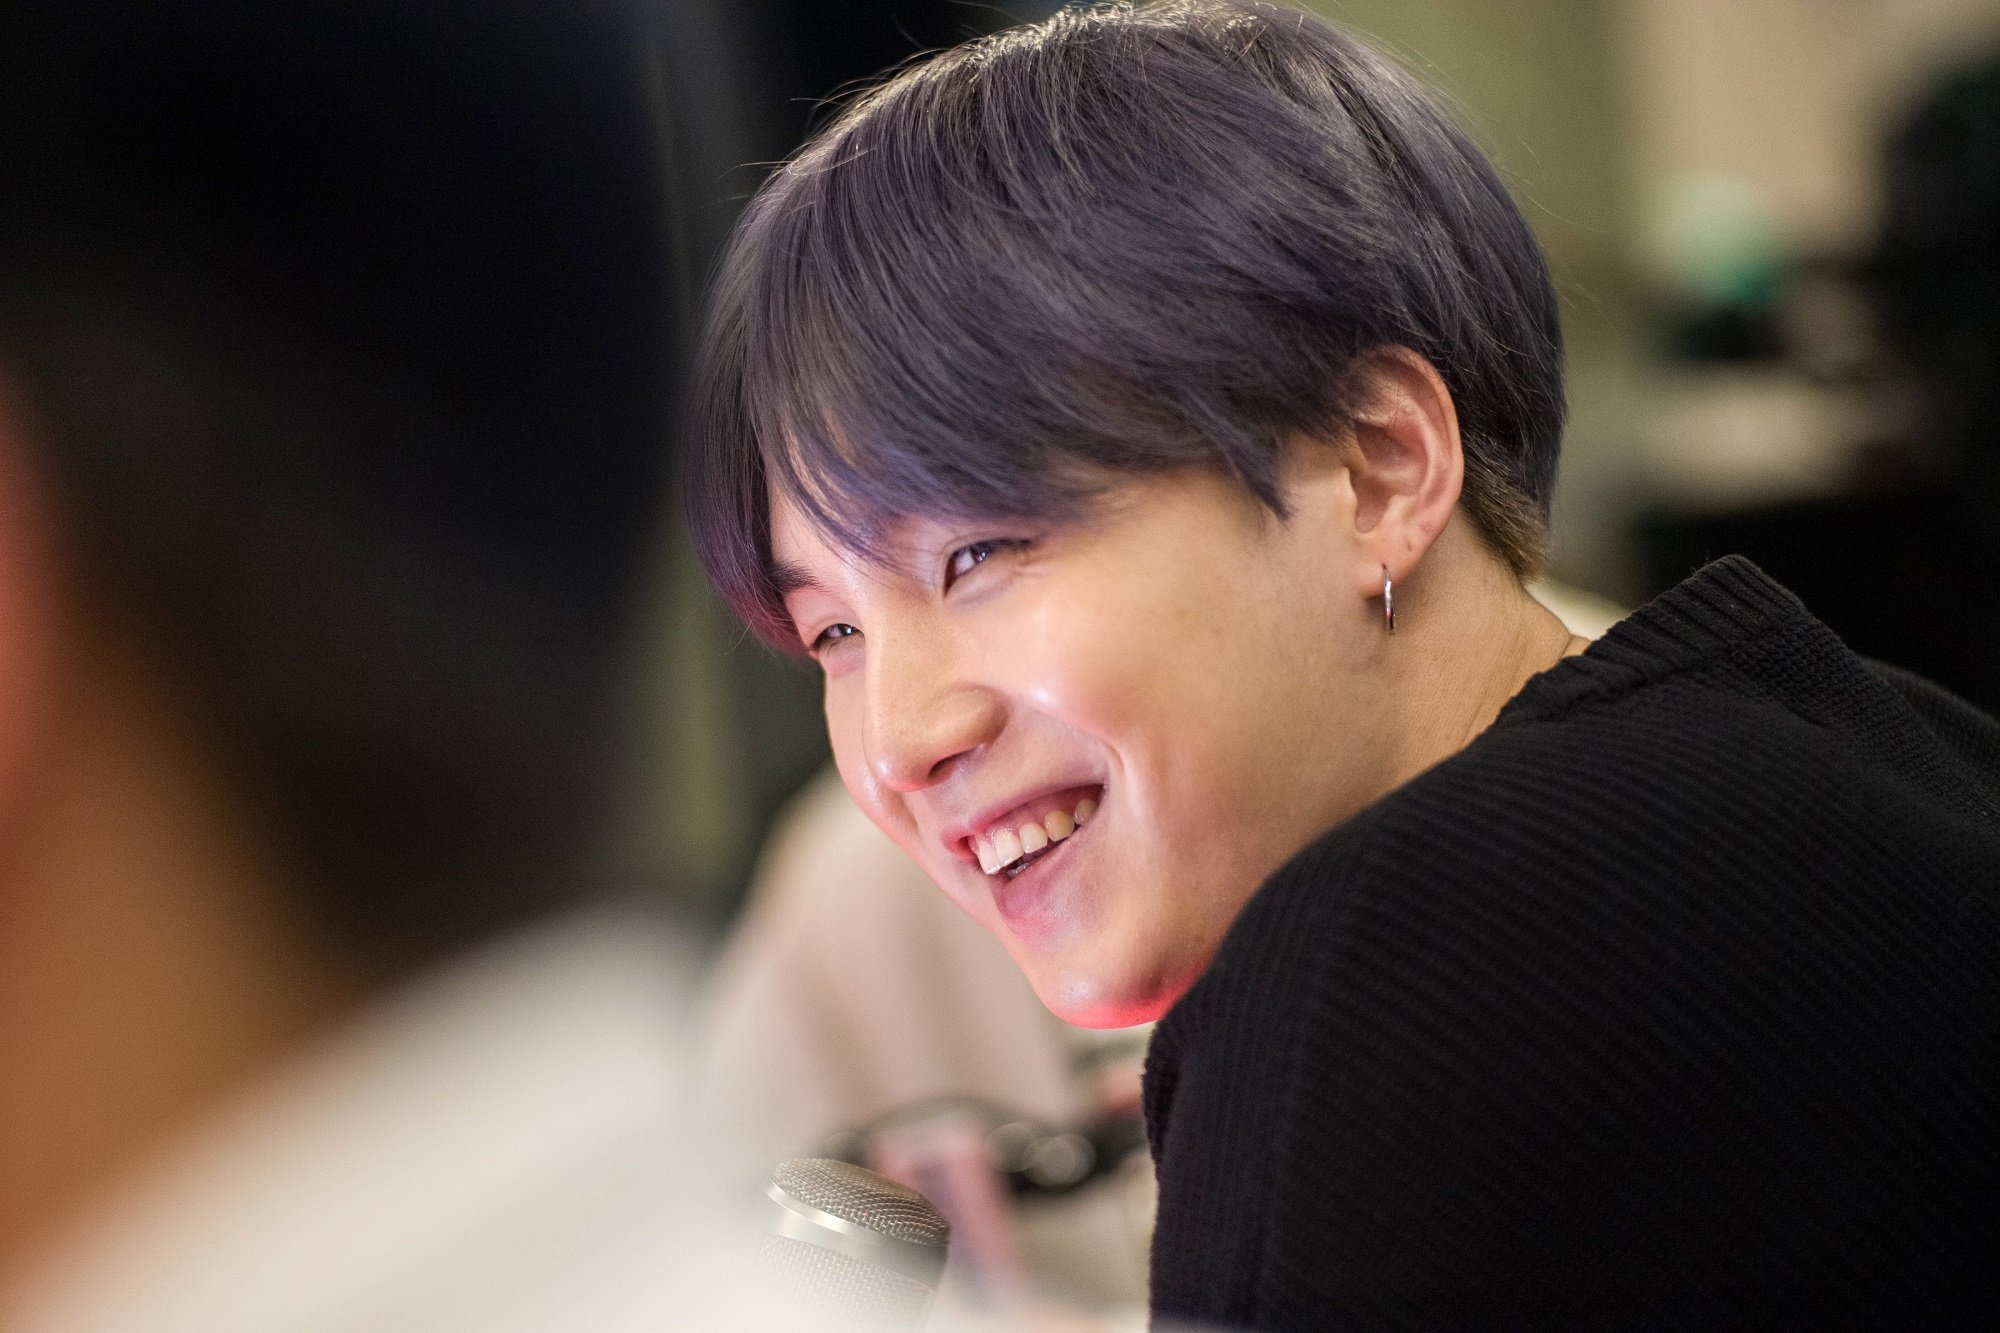 Suga of BTS smiles while visiting The Elvis Duran Z100 Morning Show in 2019